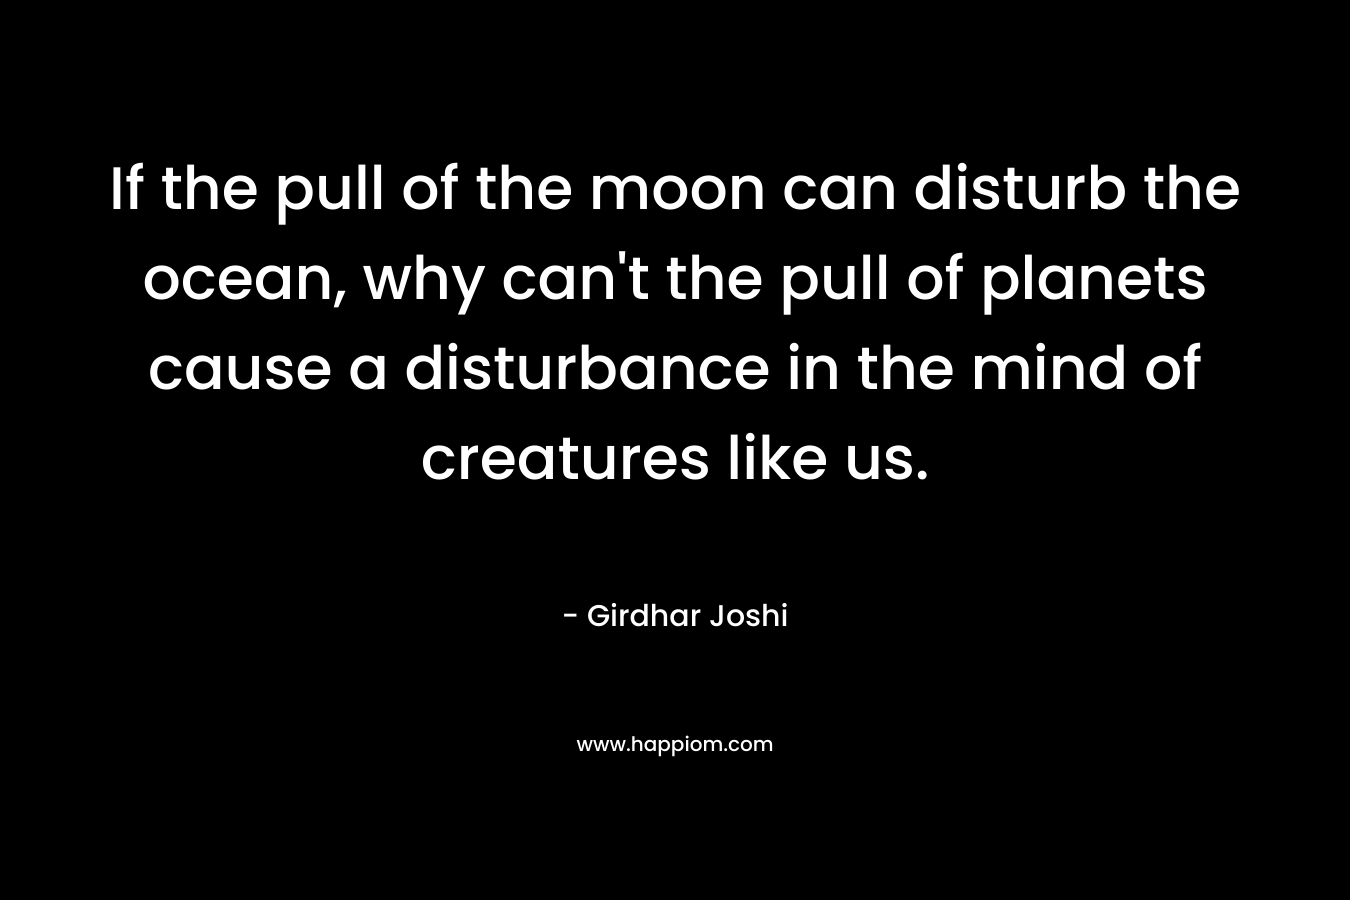 If the pull of the moon can disturb the ocean, why can't the pull of planets cause a disturbance in the mind of creatures like us.